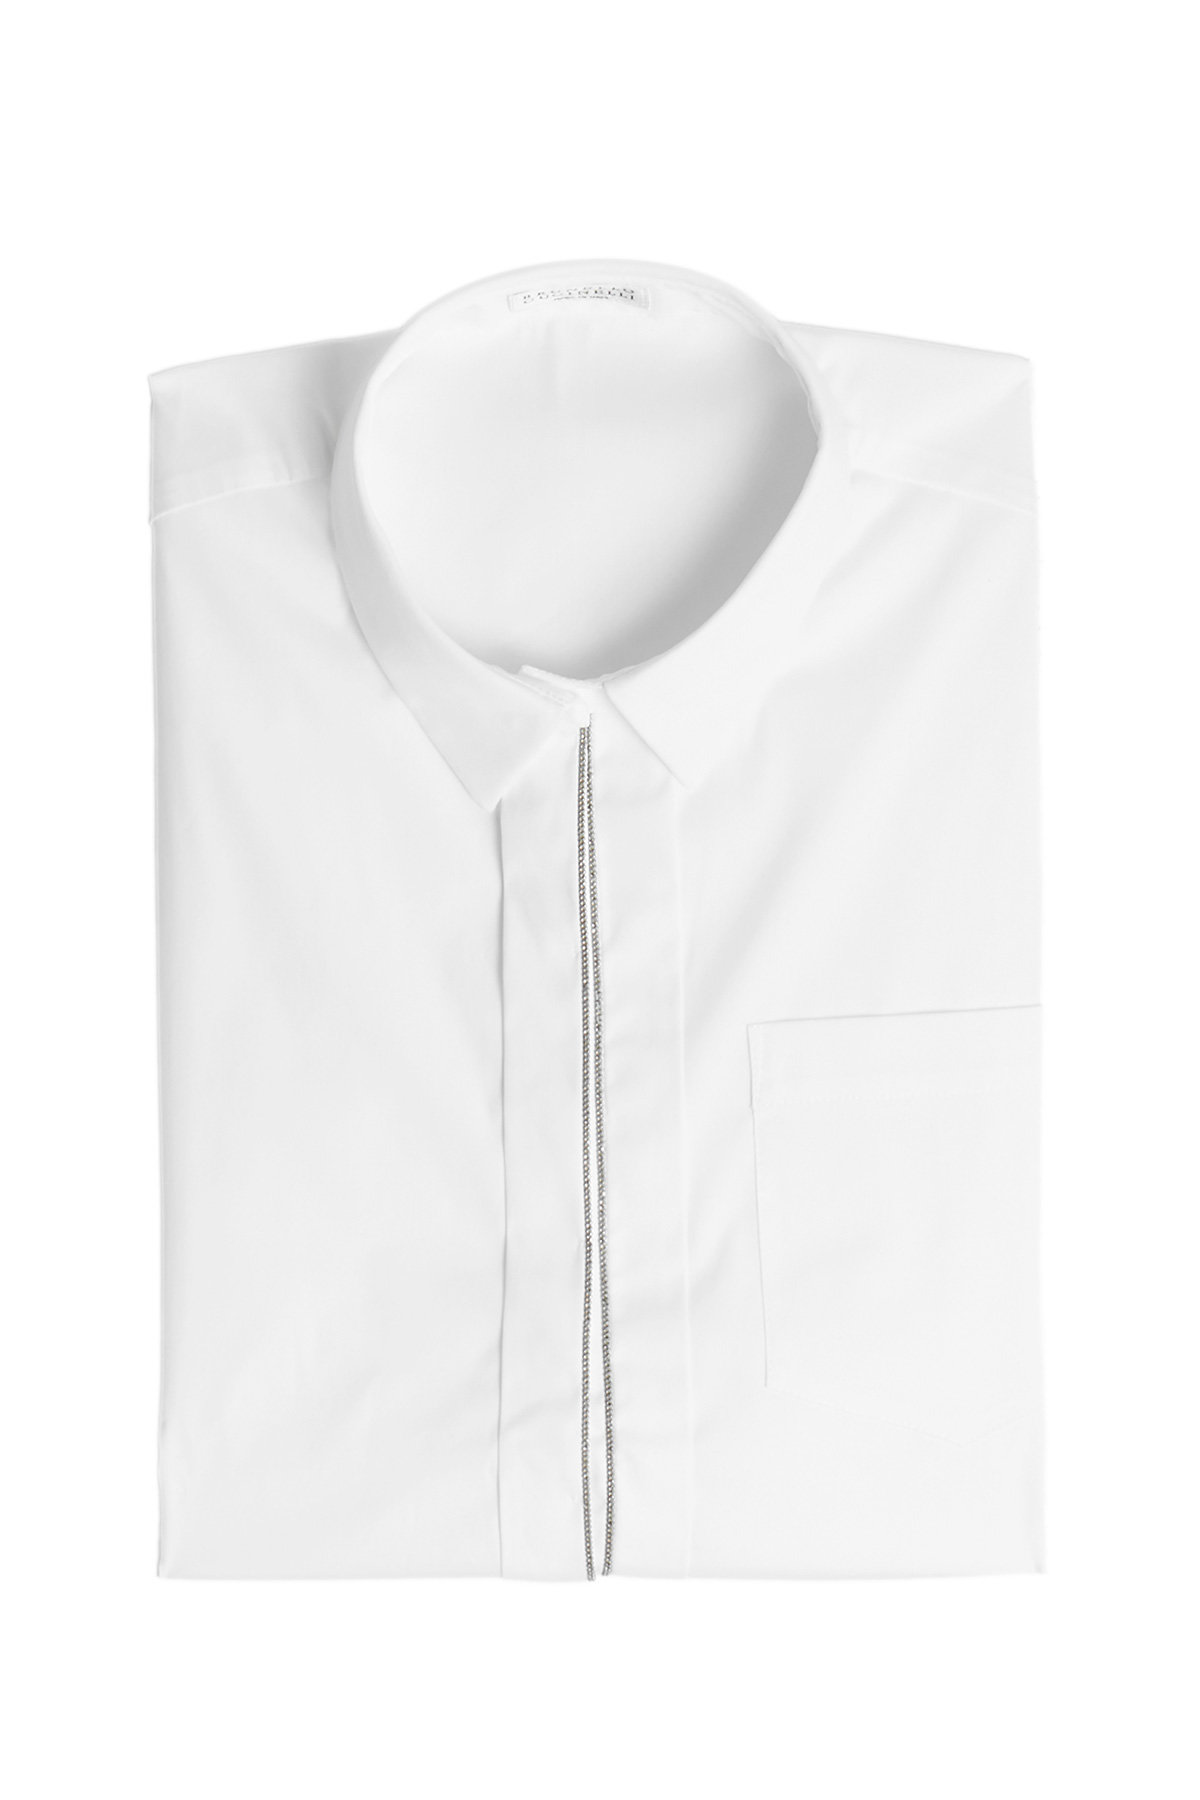 Embellished Shirt by Brunello Cucinelli